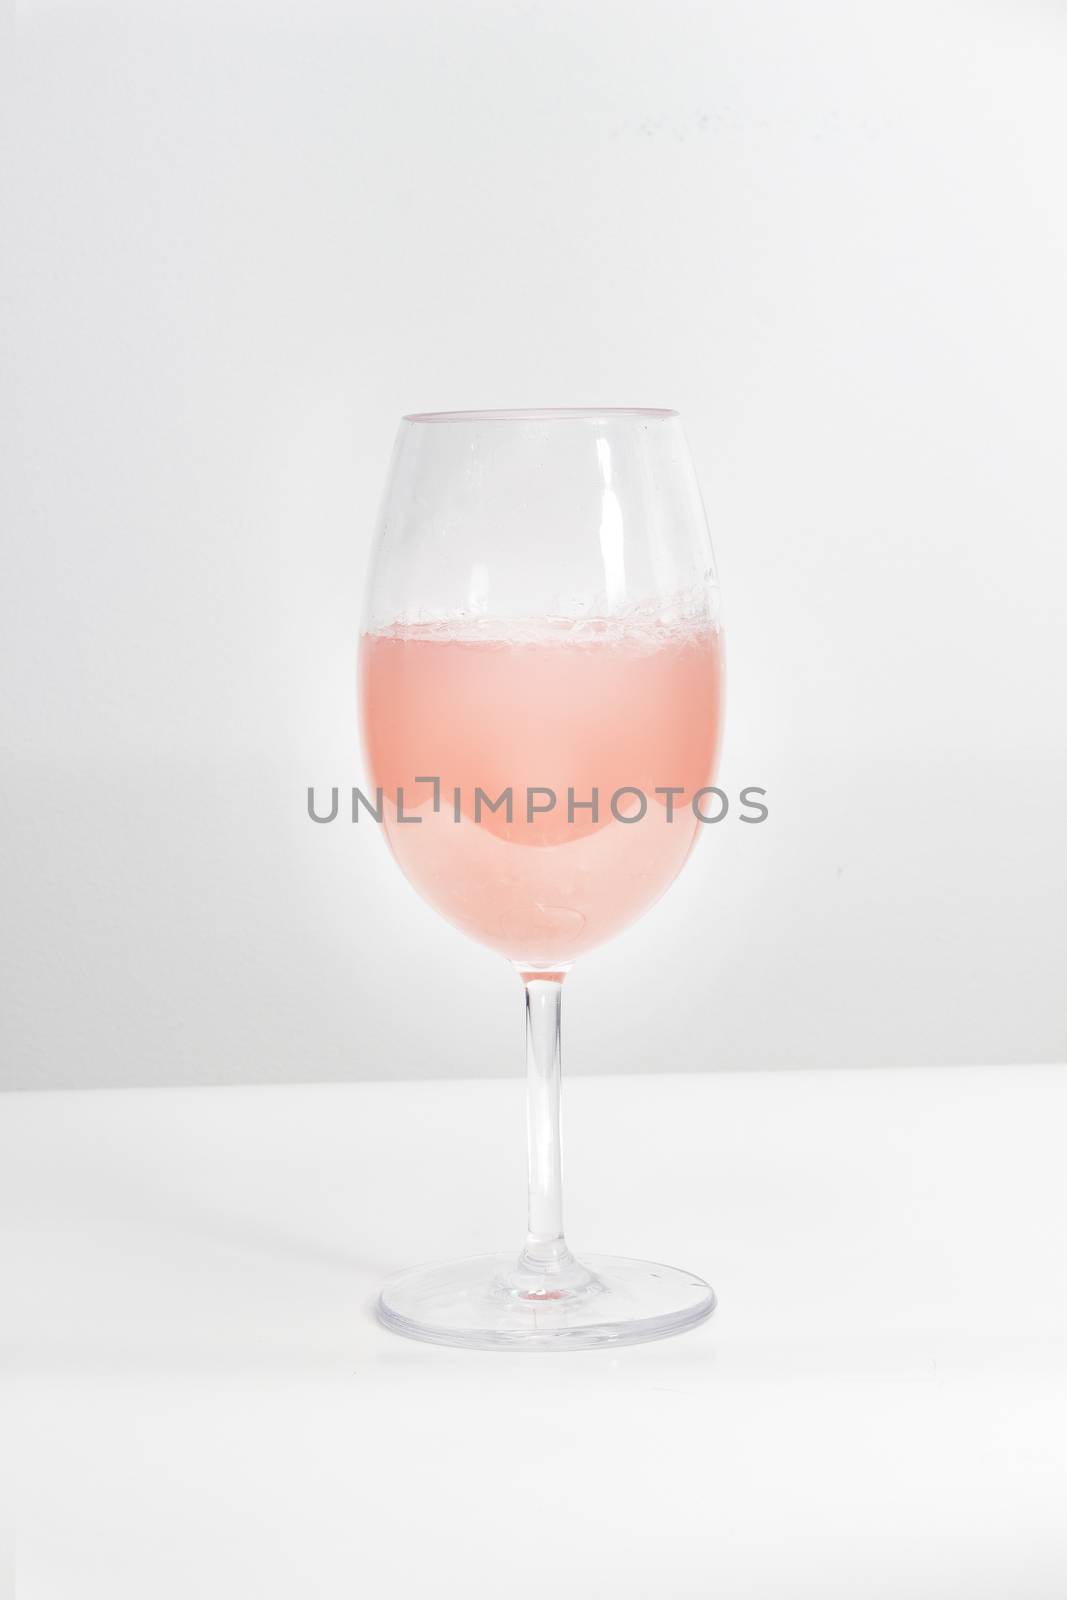 A cup of rose wine on a white table and background by oasisamuel